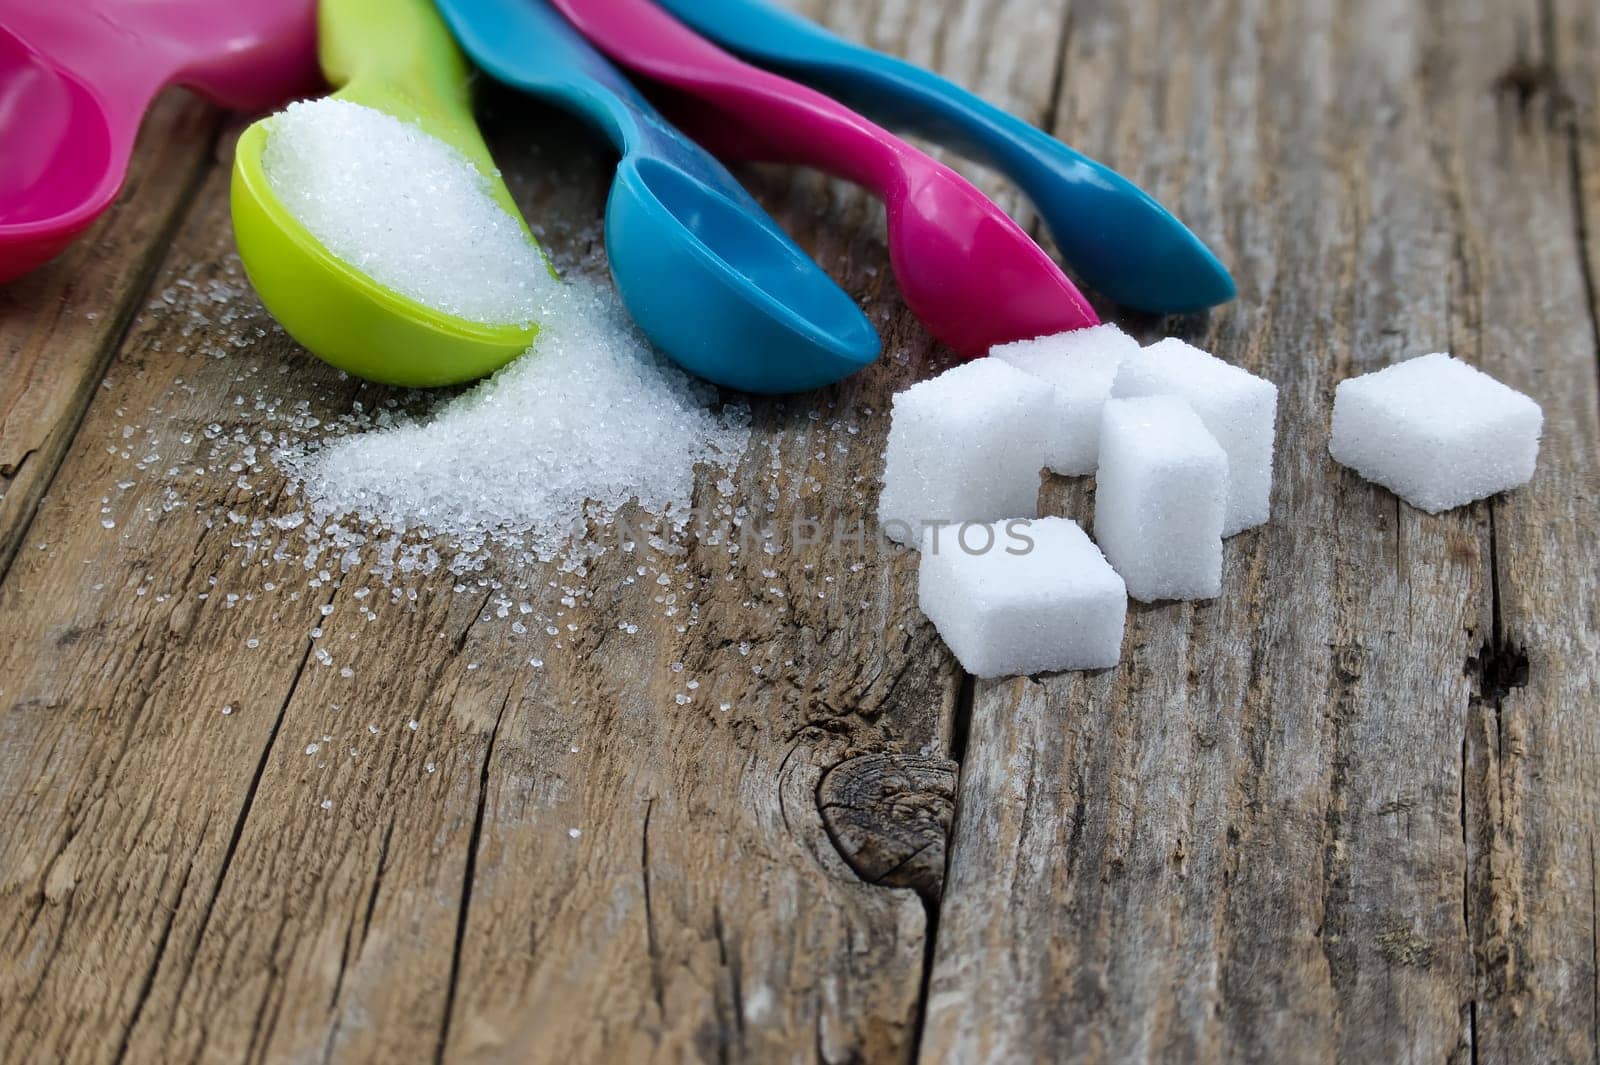 Sugar in colorful measuring spoons on wooden surface by NetPix